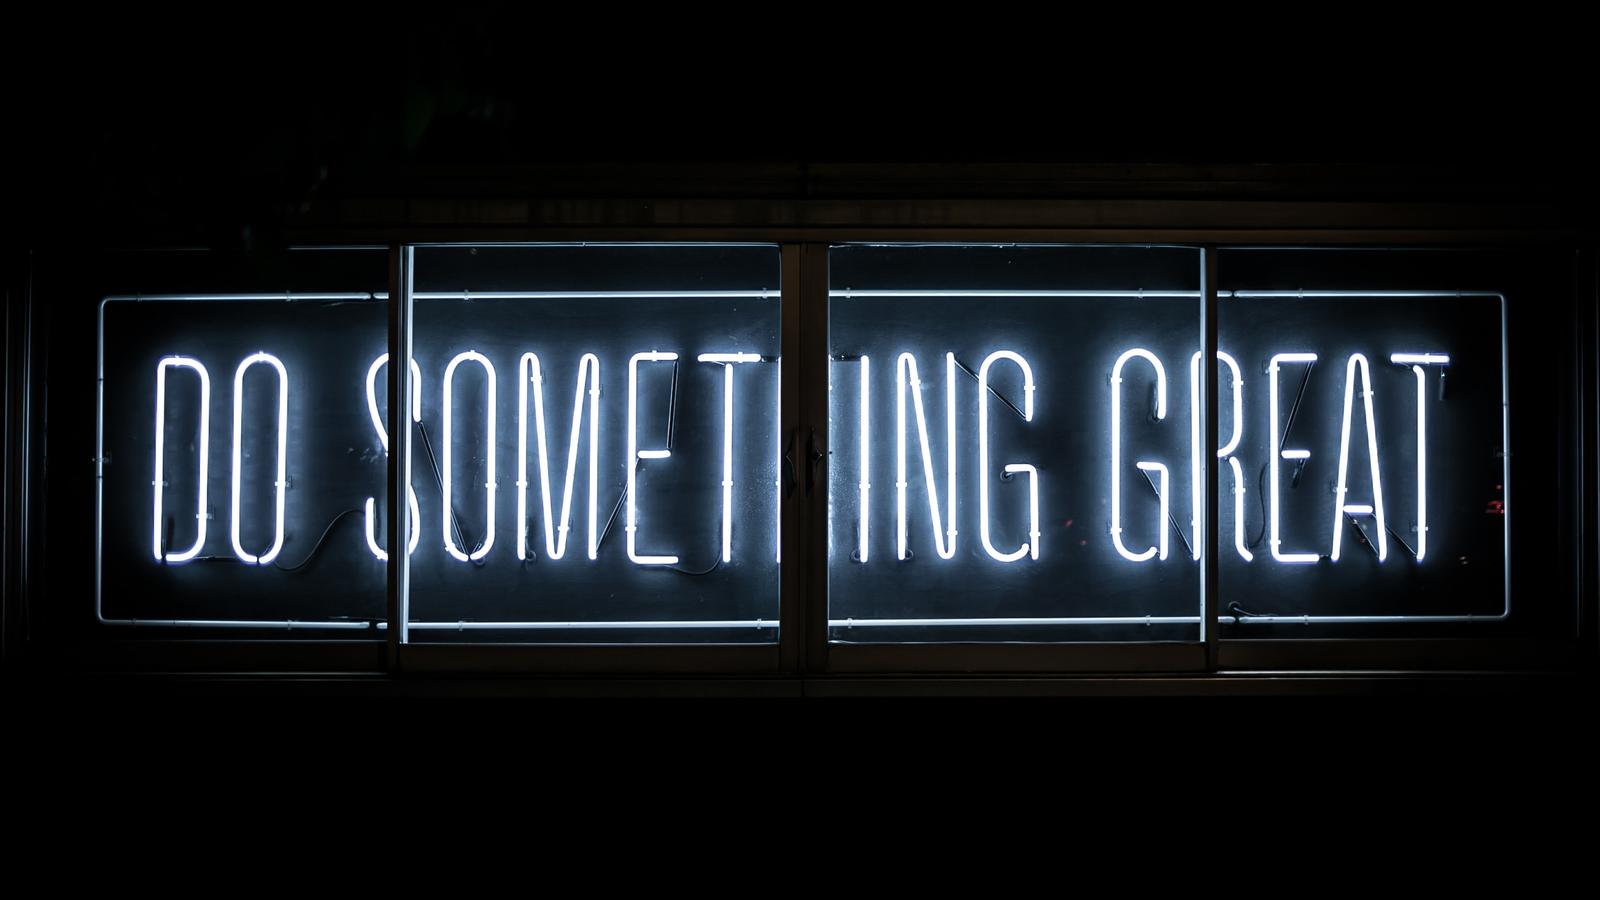 Neon sign that says do something great